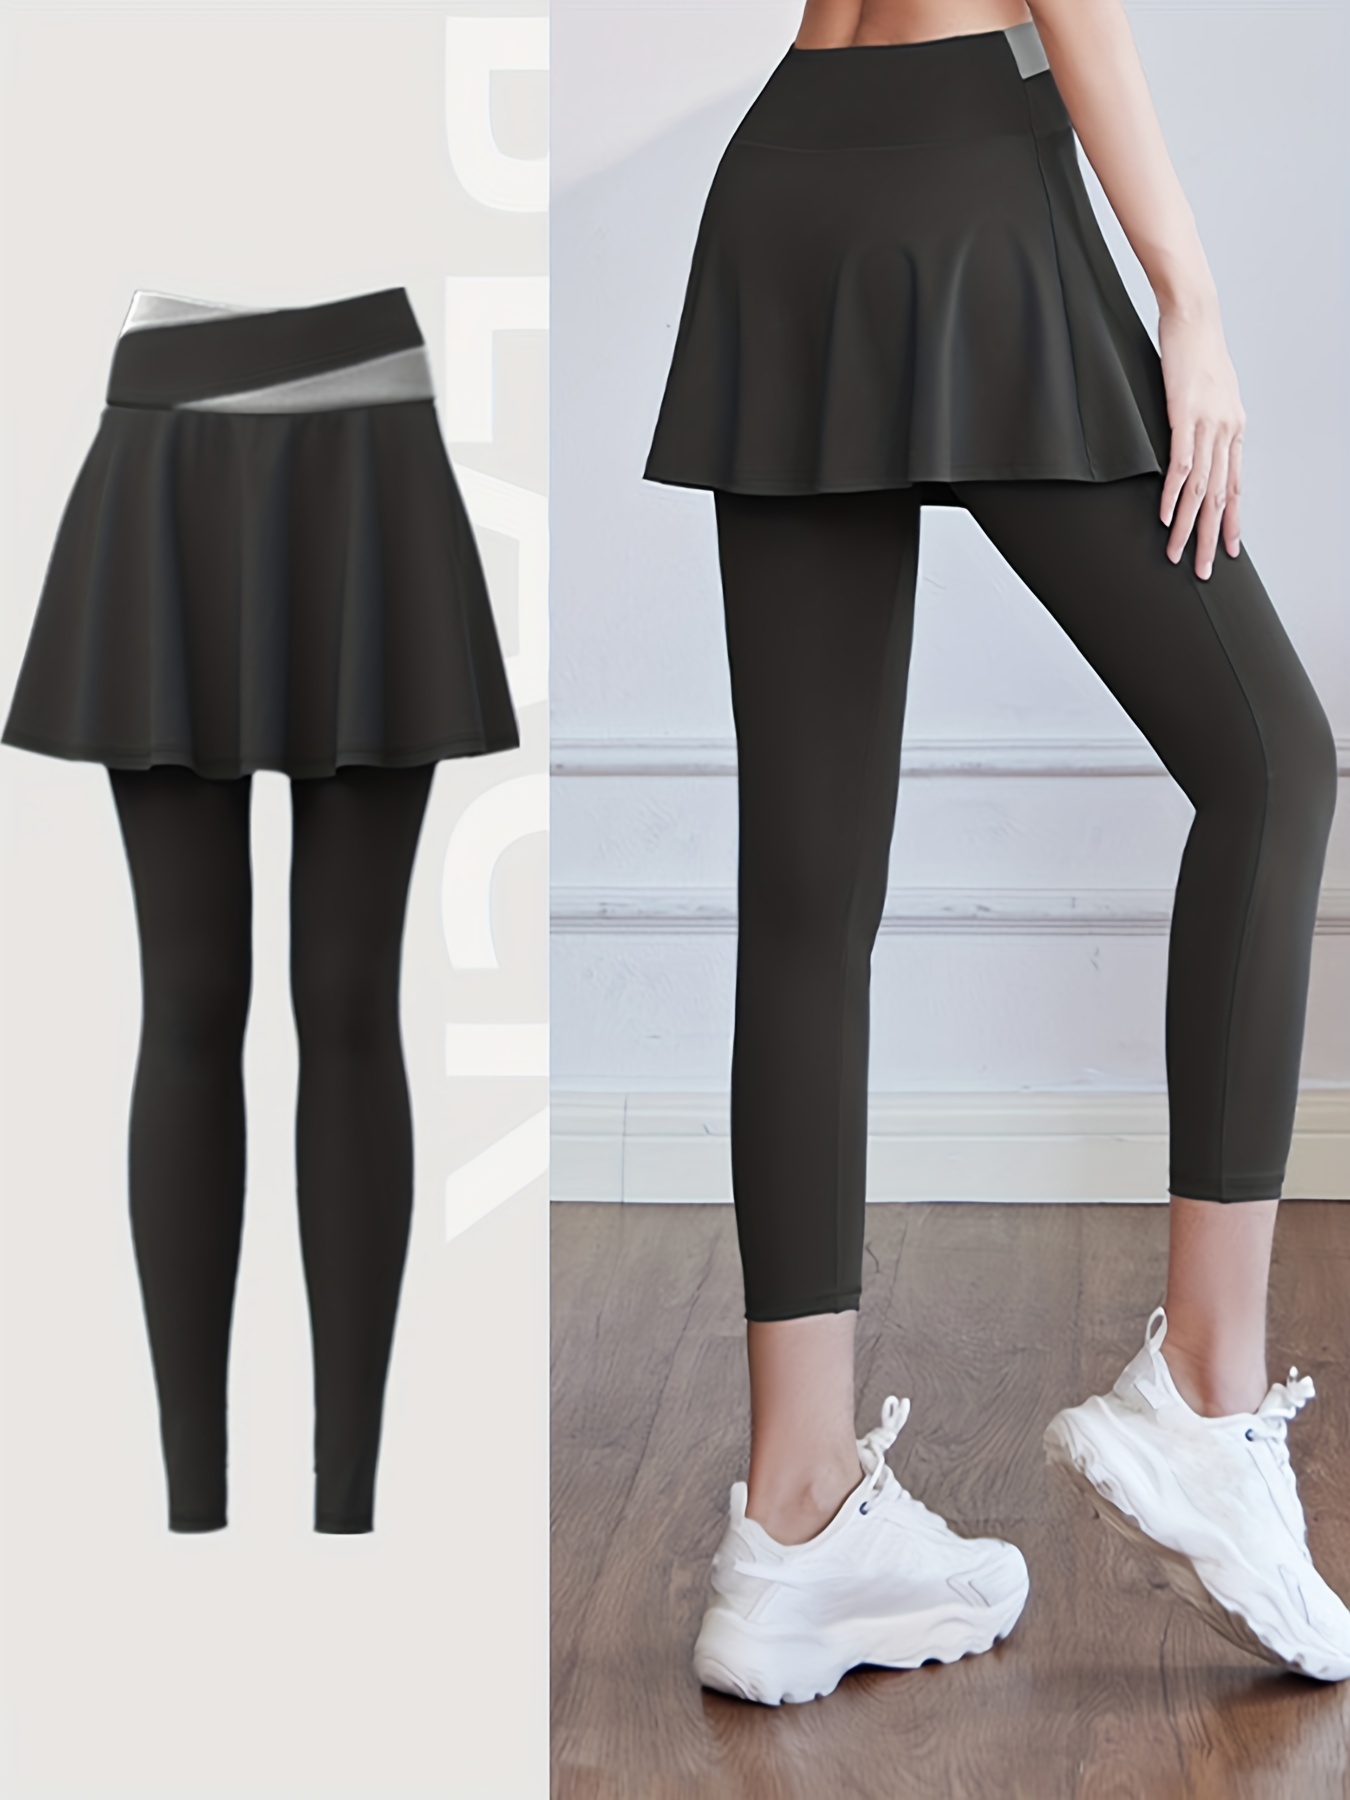 Women's 2-in-1 Sports Skirt with High Waist Leggings - Perfect for Tennis,  Golf, Running and Workout - Stylish and Comfortable Activewear